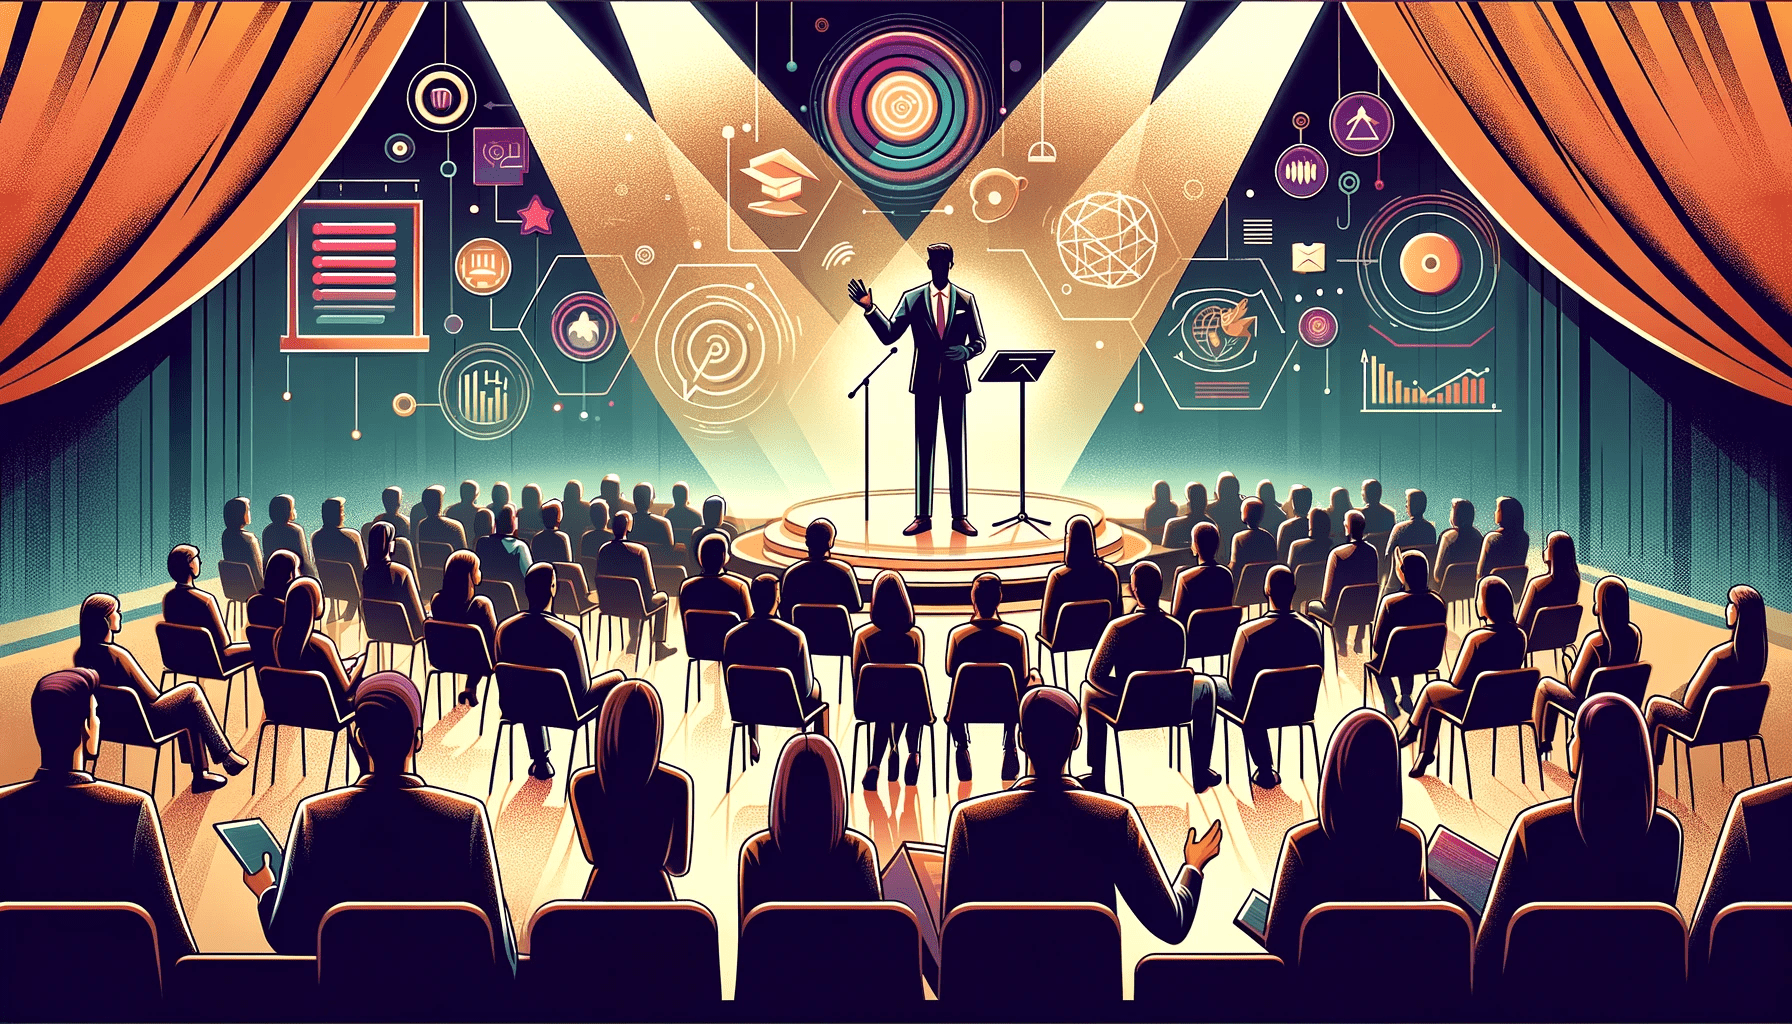 Cover art created by Dall-E: „Create a wide digital illustration for a blog post title about the Speechworks Formula, depicting a speaker in front of an audience.“